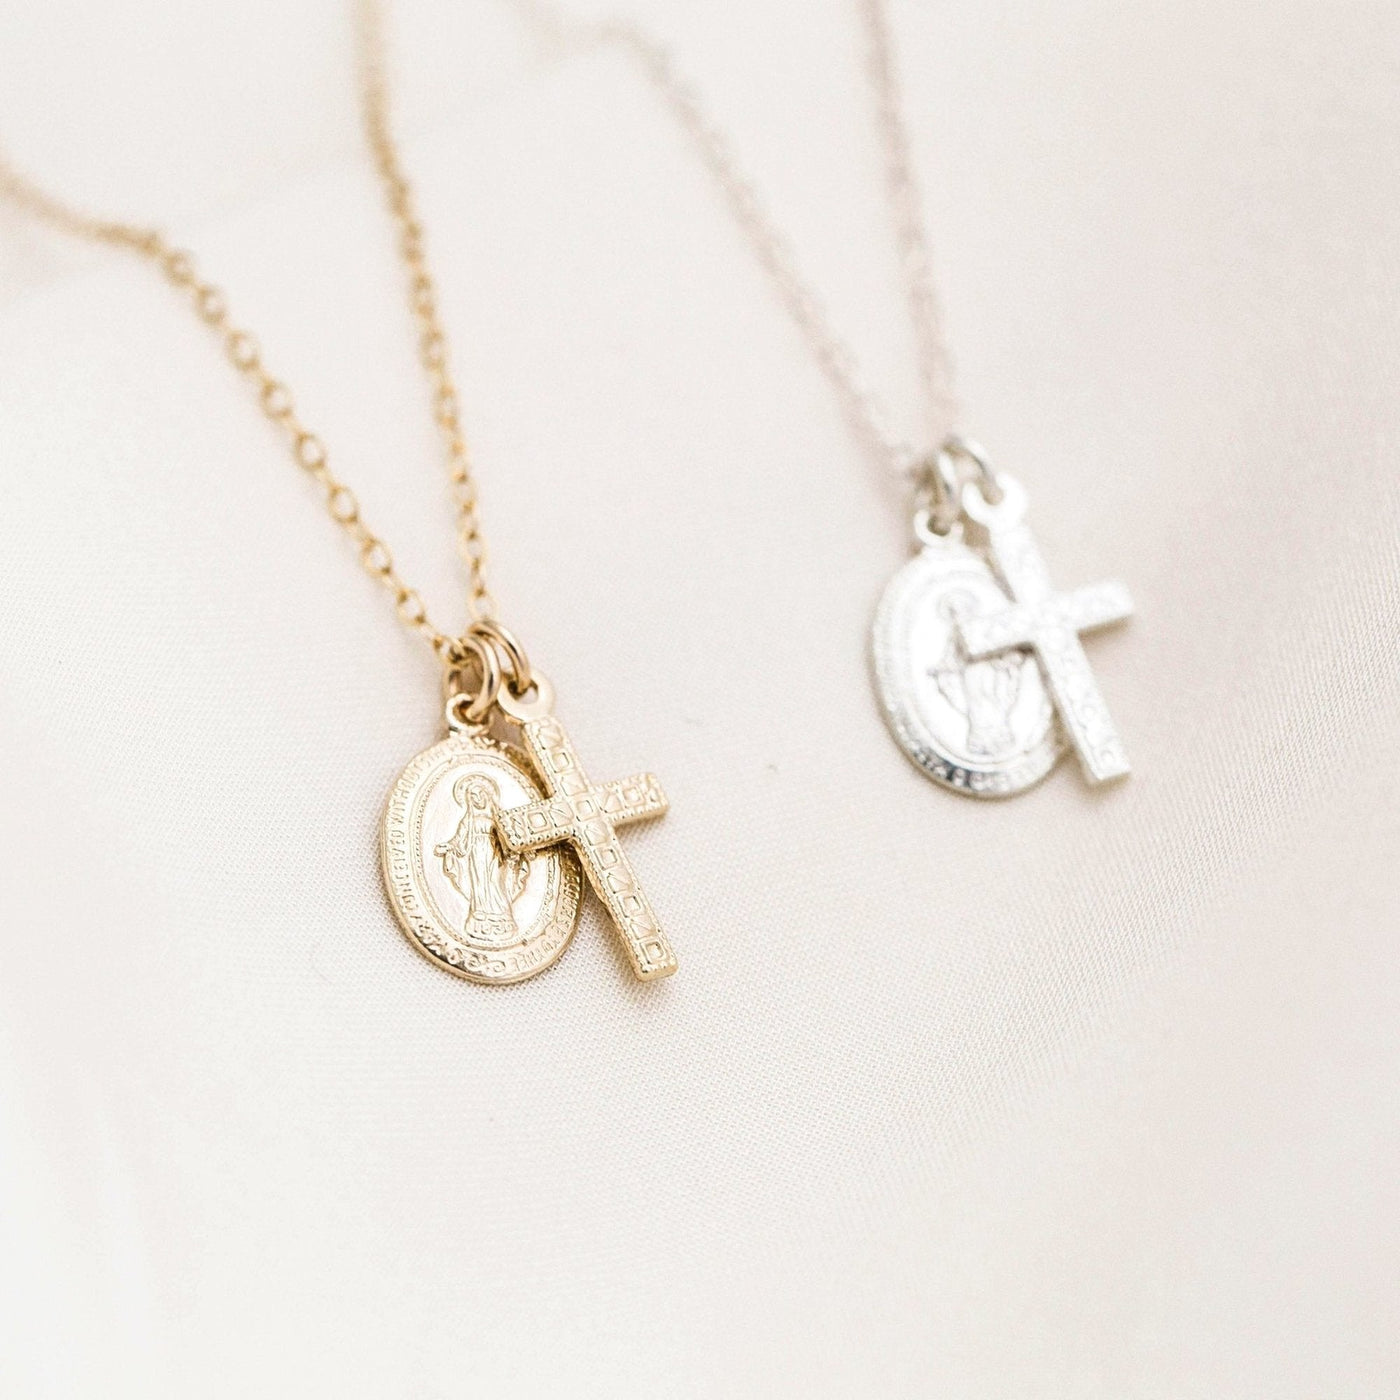 Tiny Virgin Mary & Cross Necklace by Simple & Dainty Jewelry